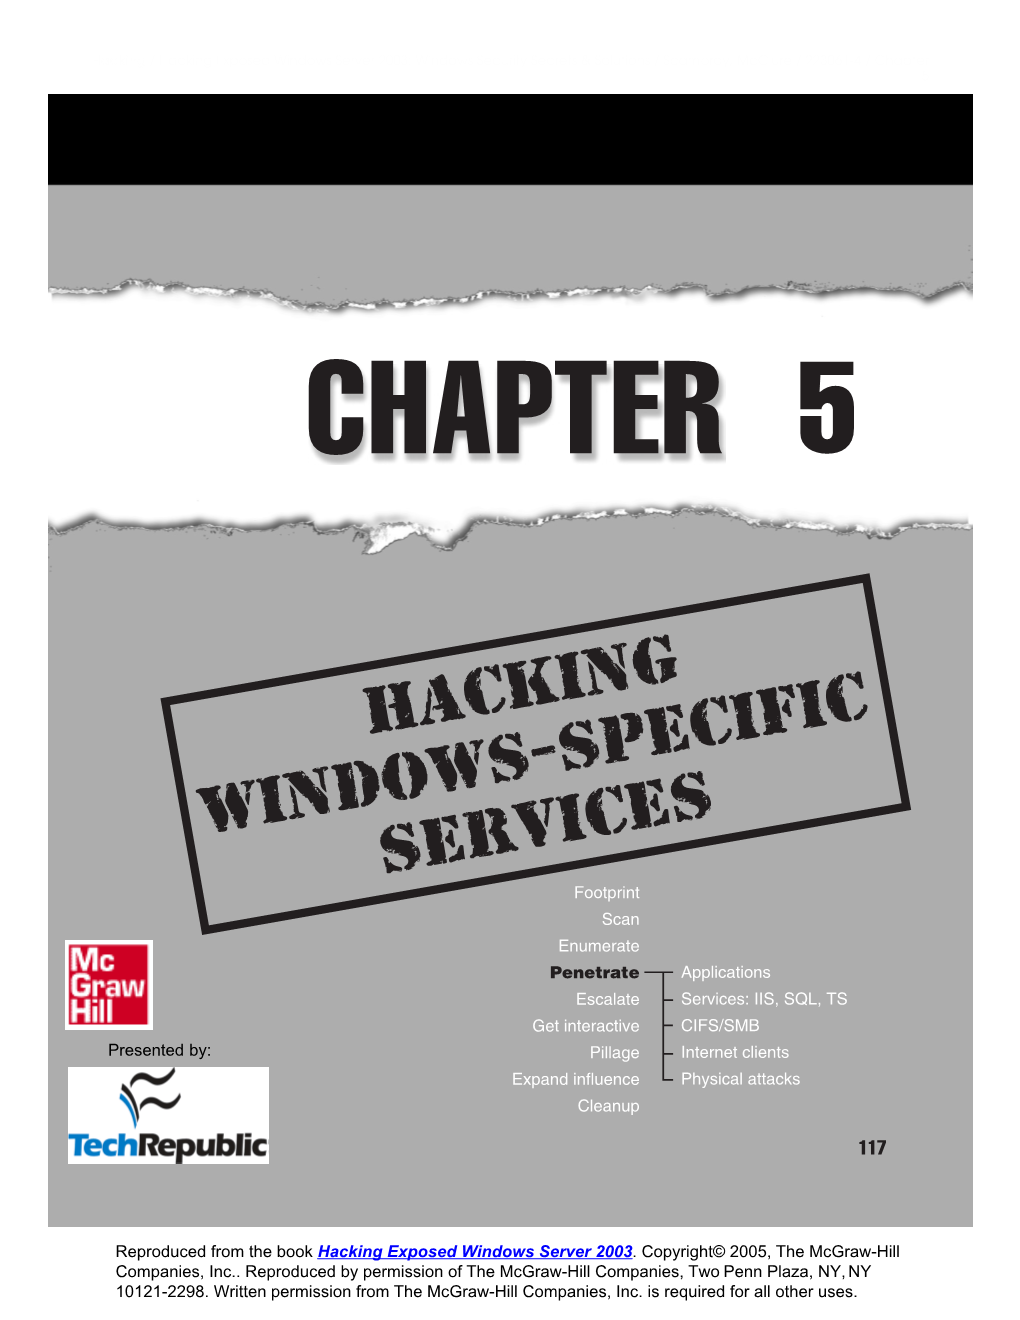 Hacking Windows-Specific Services